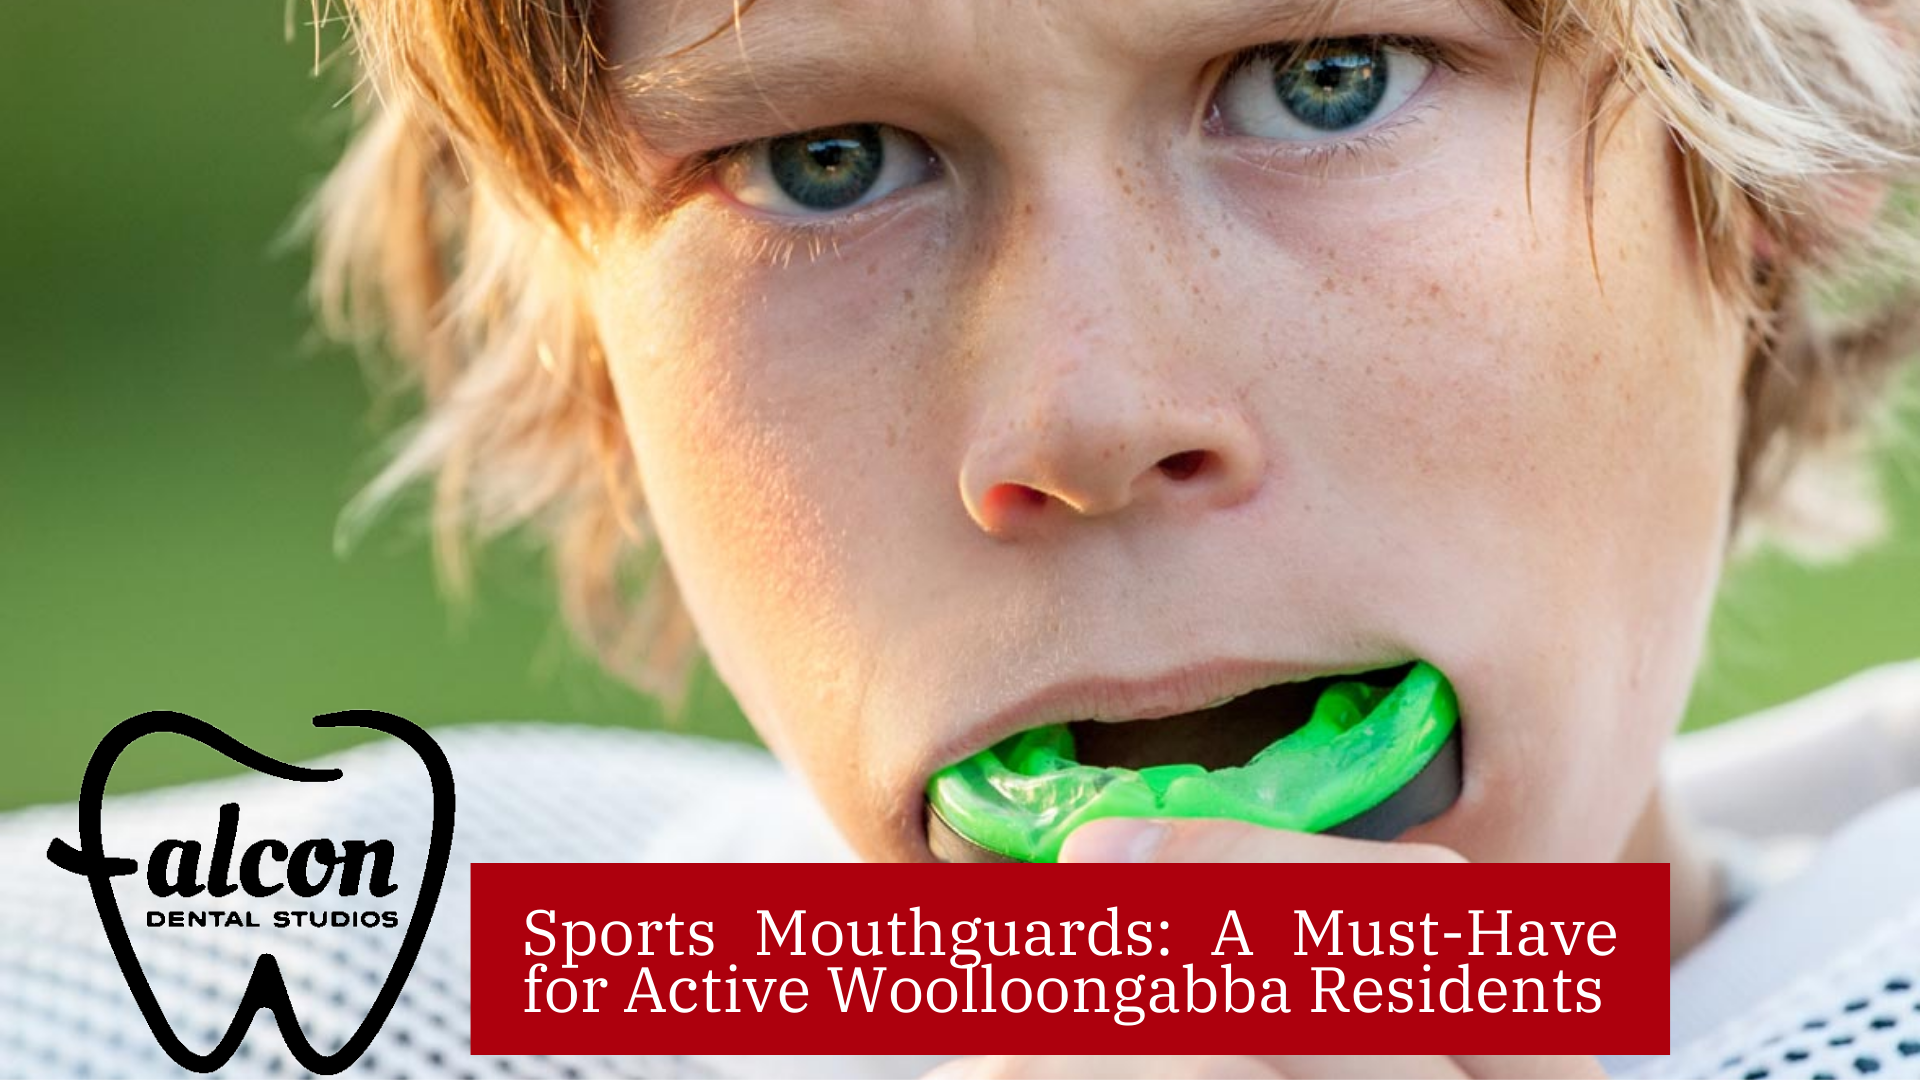 Sports Mouthguards: A Must-Have for Active Woolloongabba Residents - Falcon Dental Studios